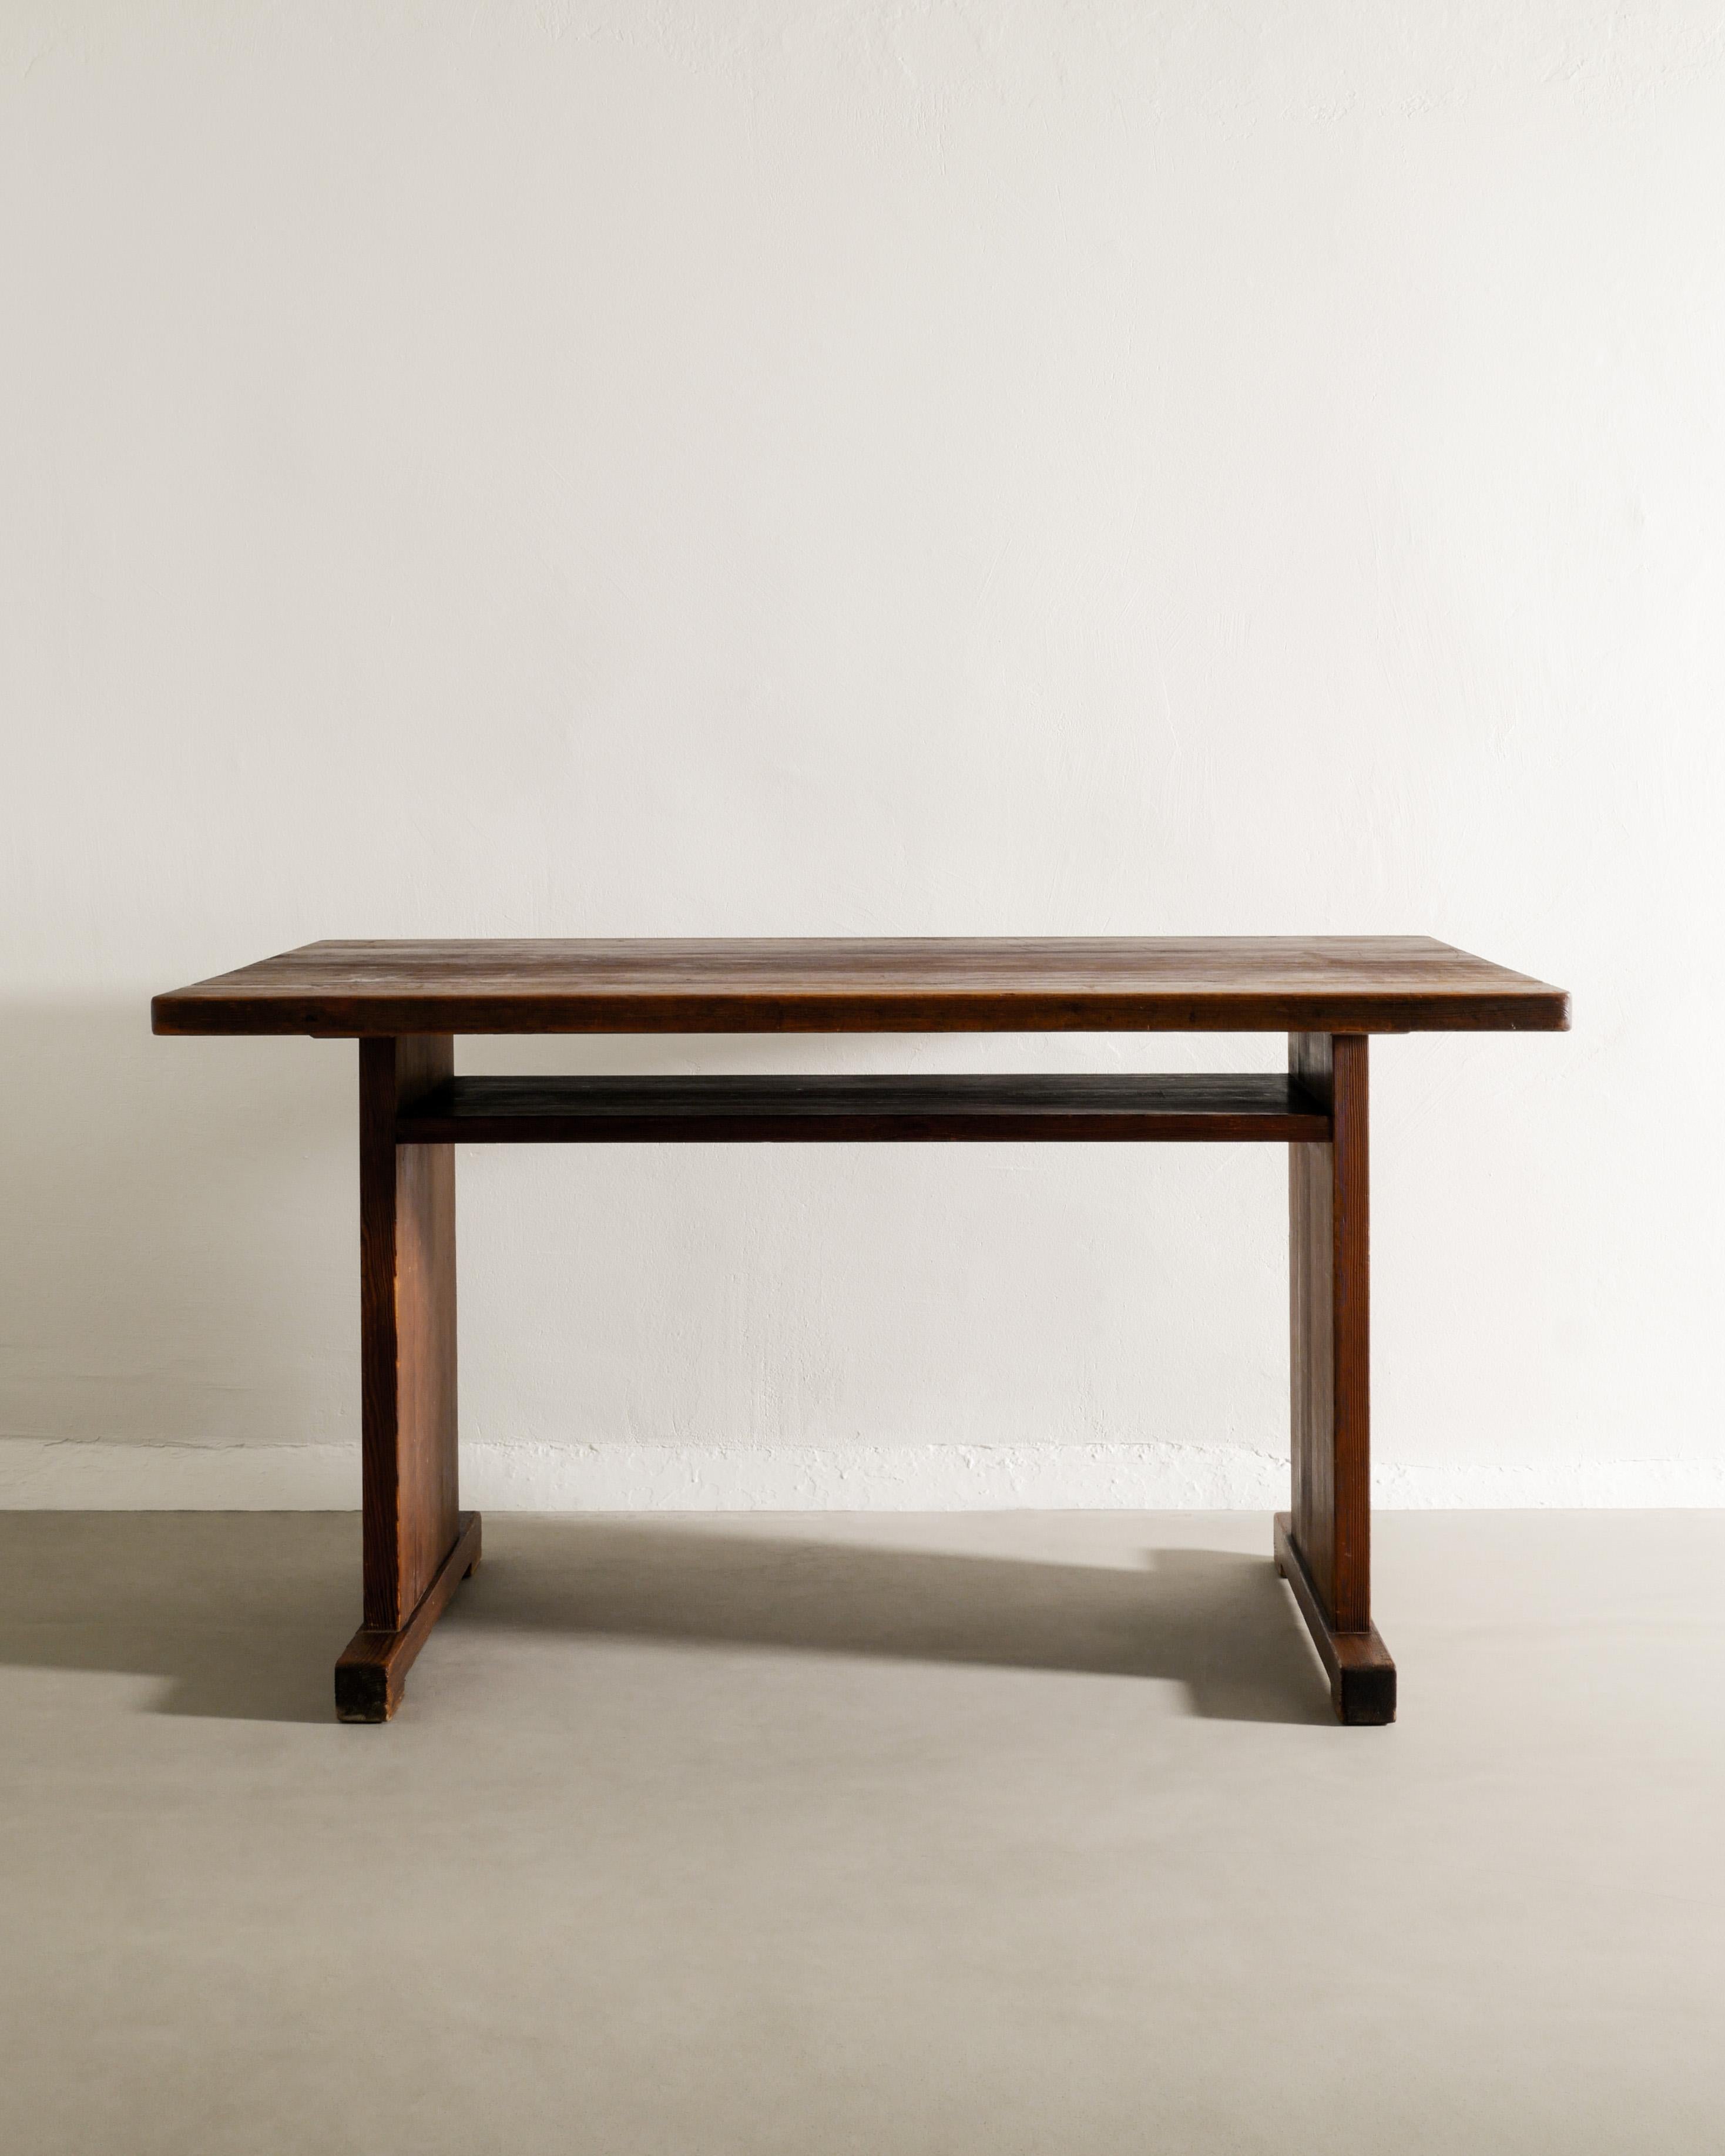 Scandinavian Modern Swedish Pine Table / Desk in style of Axel Einar Hjorth Produced in Sweden 1930s For Sale